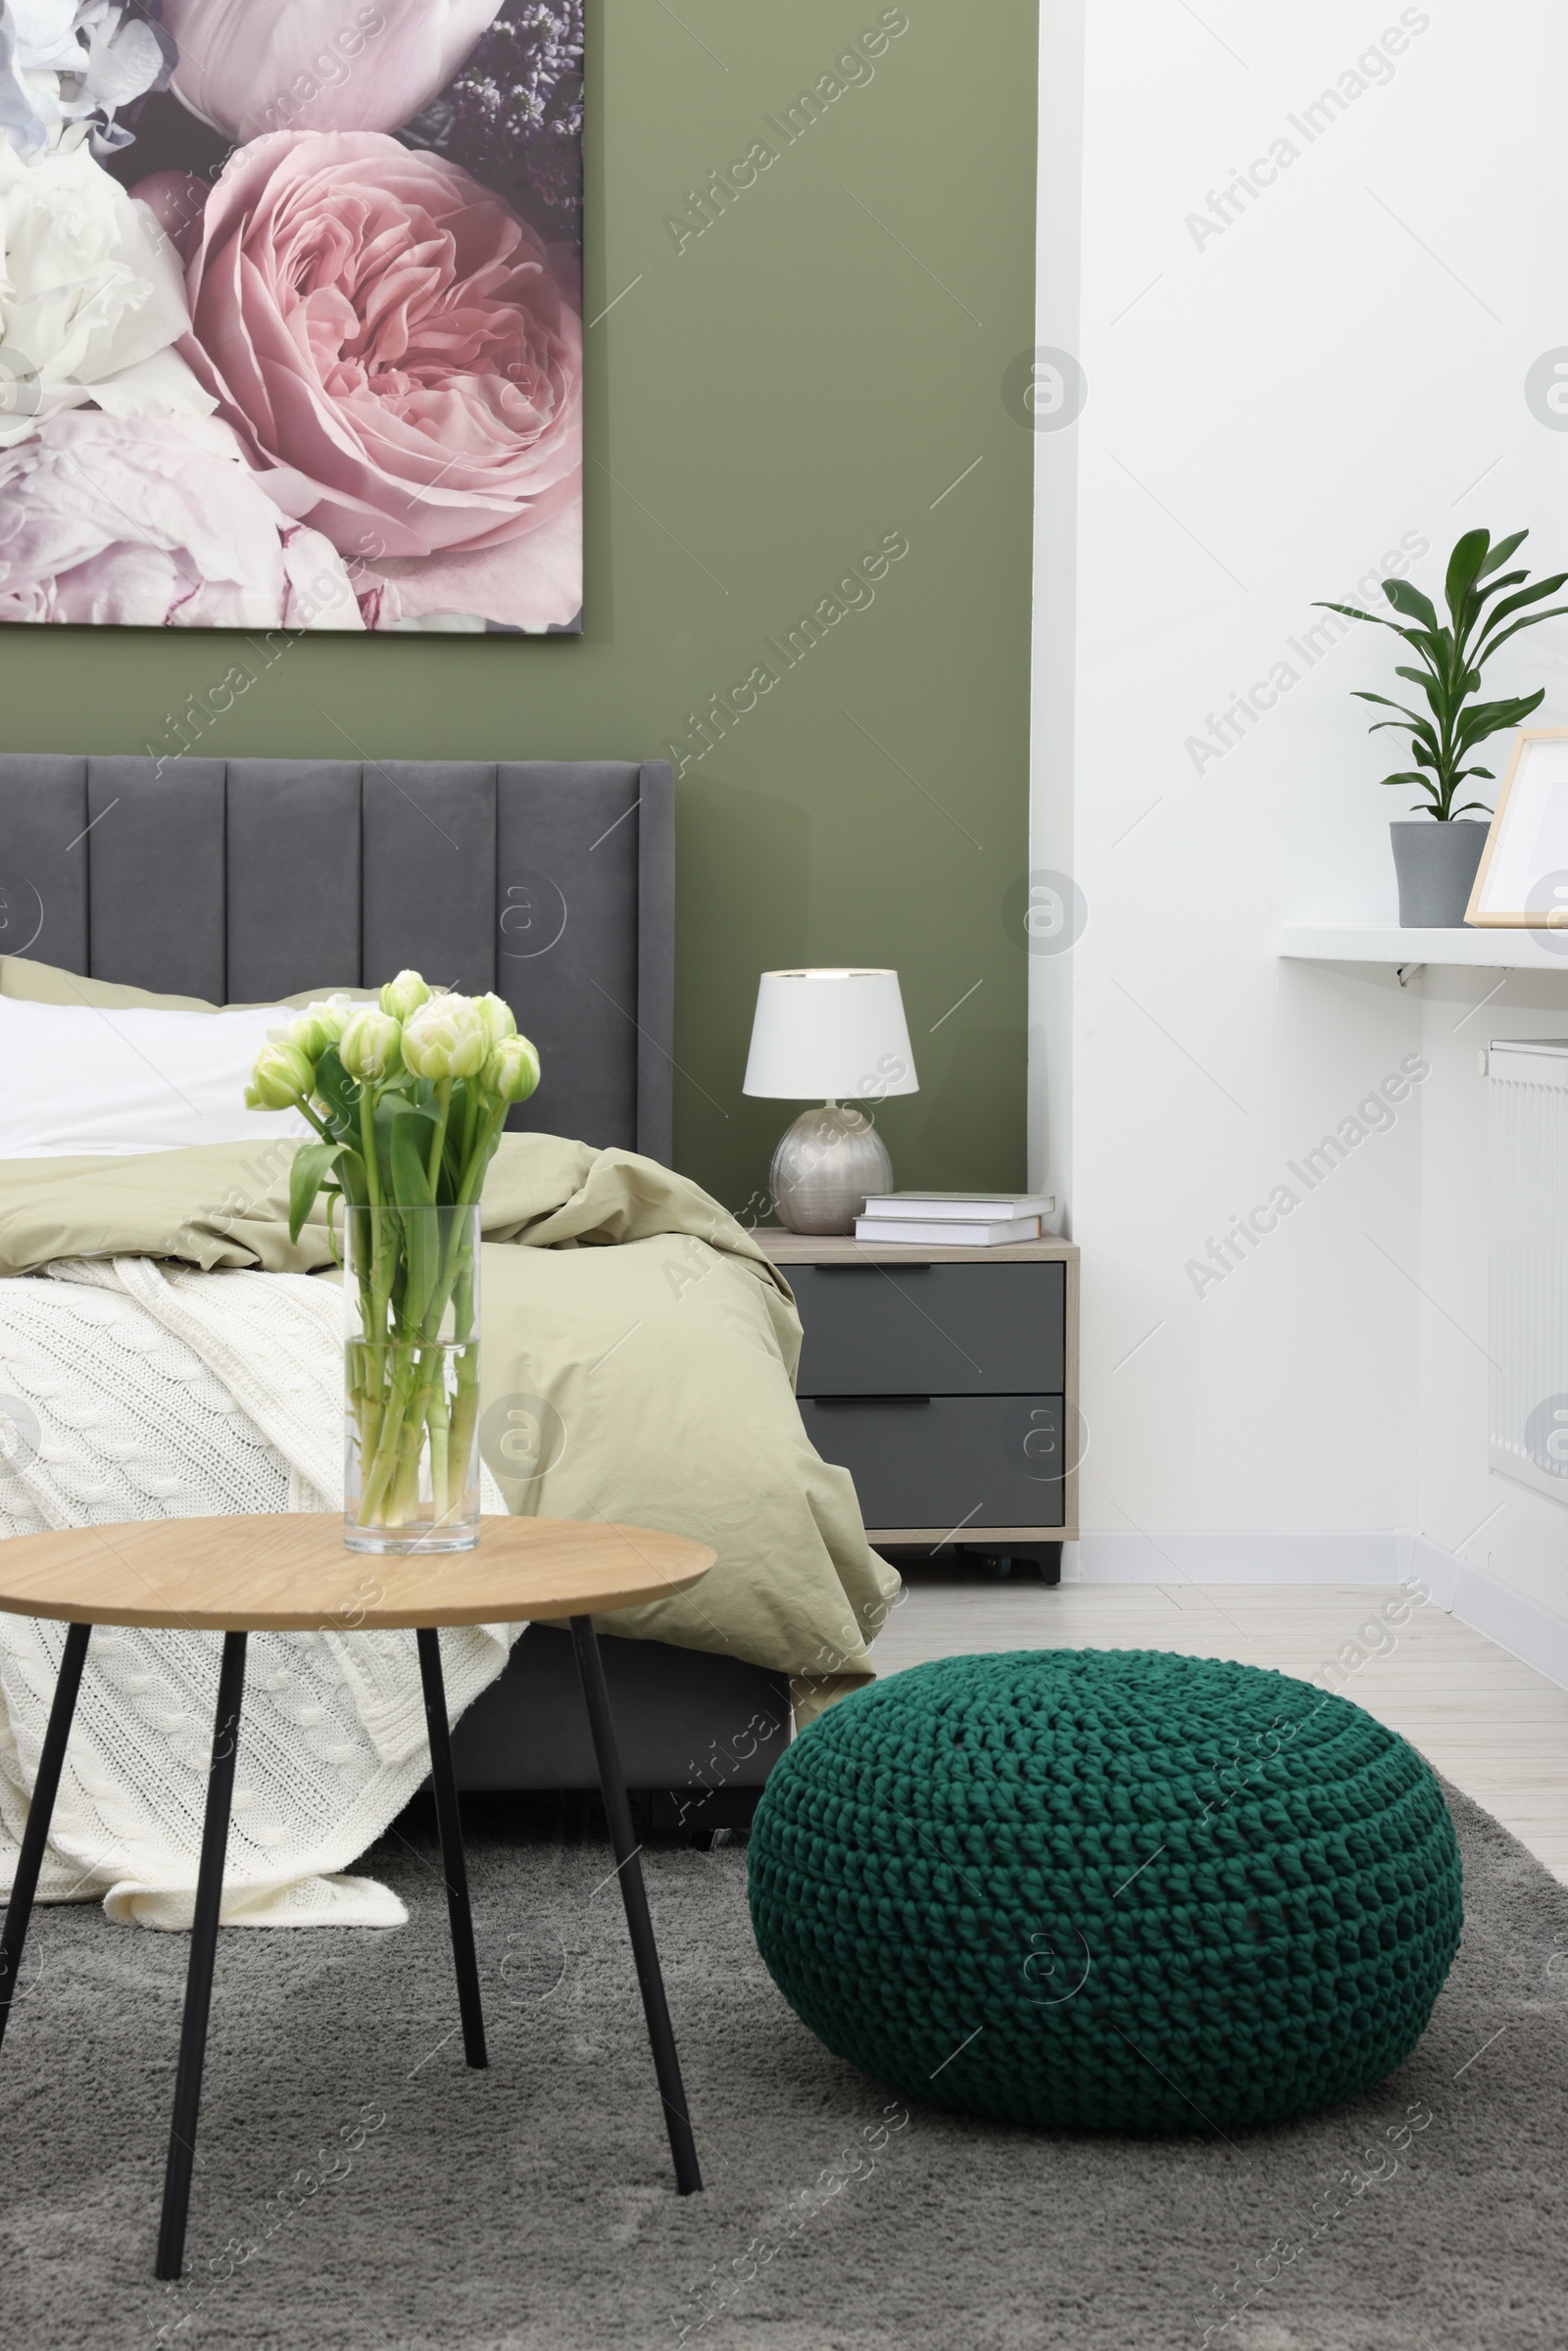 Photo of Stylish bedroom with comfortable bed, bedside table and vase of tulips. Interior design